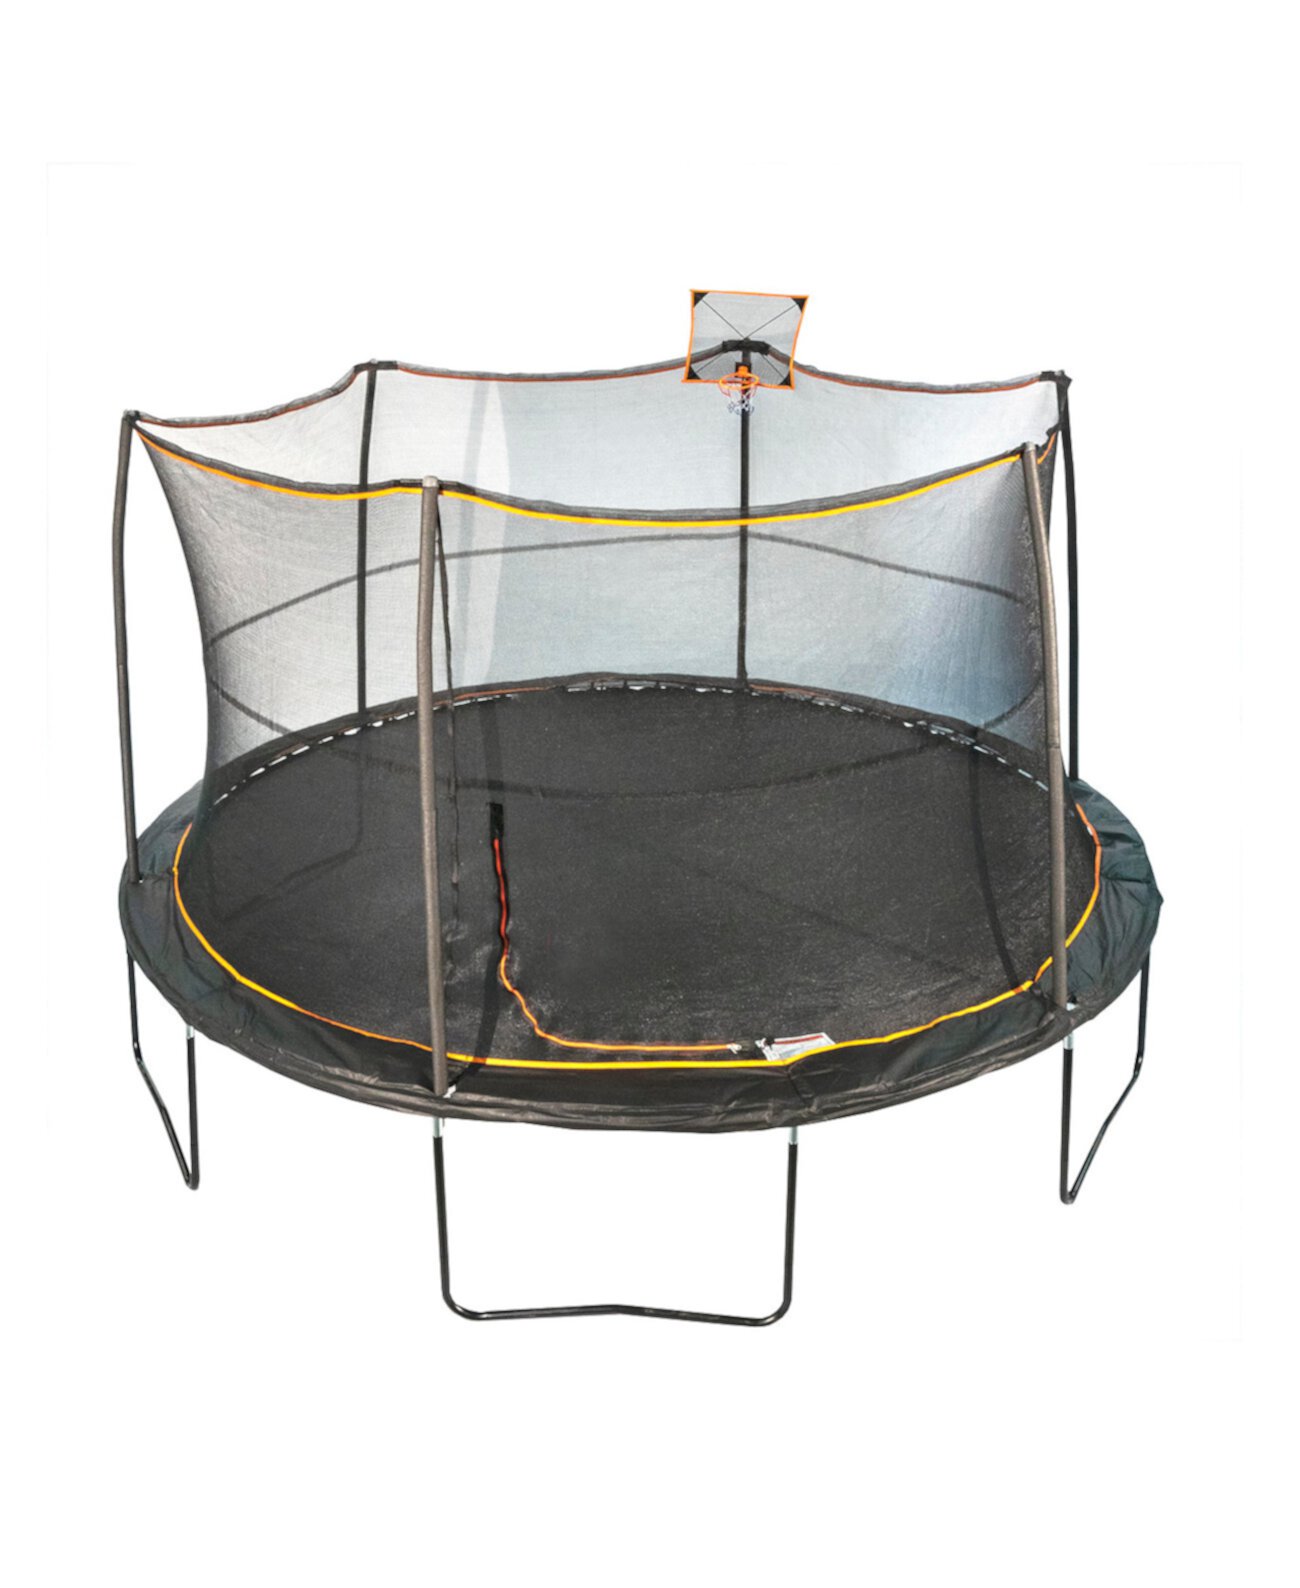 14ft Trampoline with Basketball Hoop and Ball Jumpking